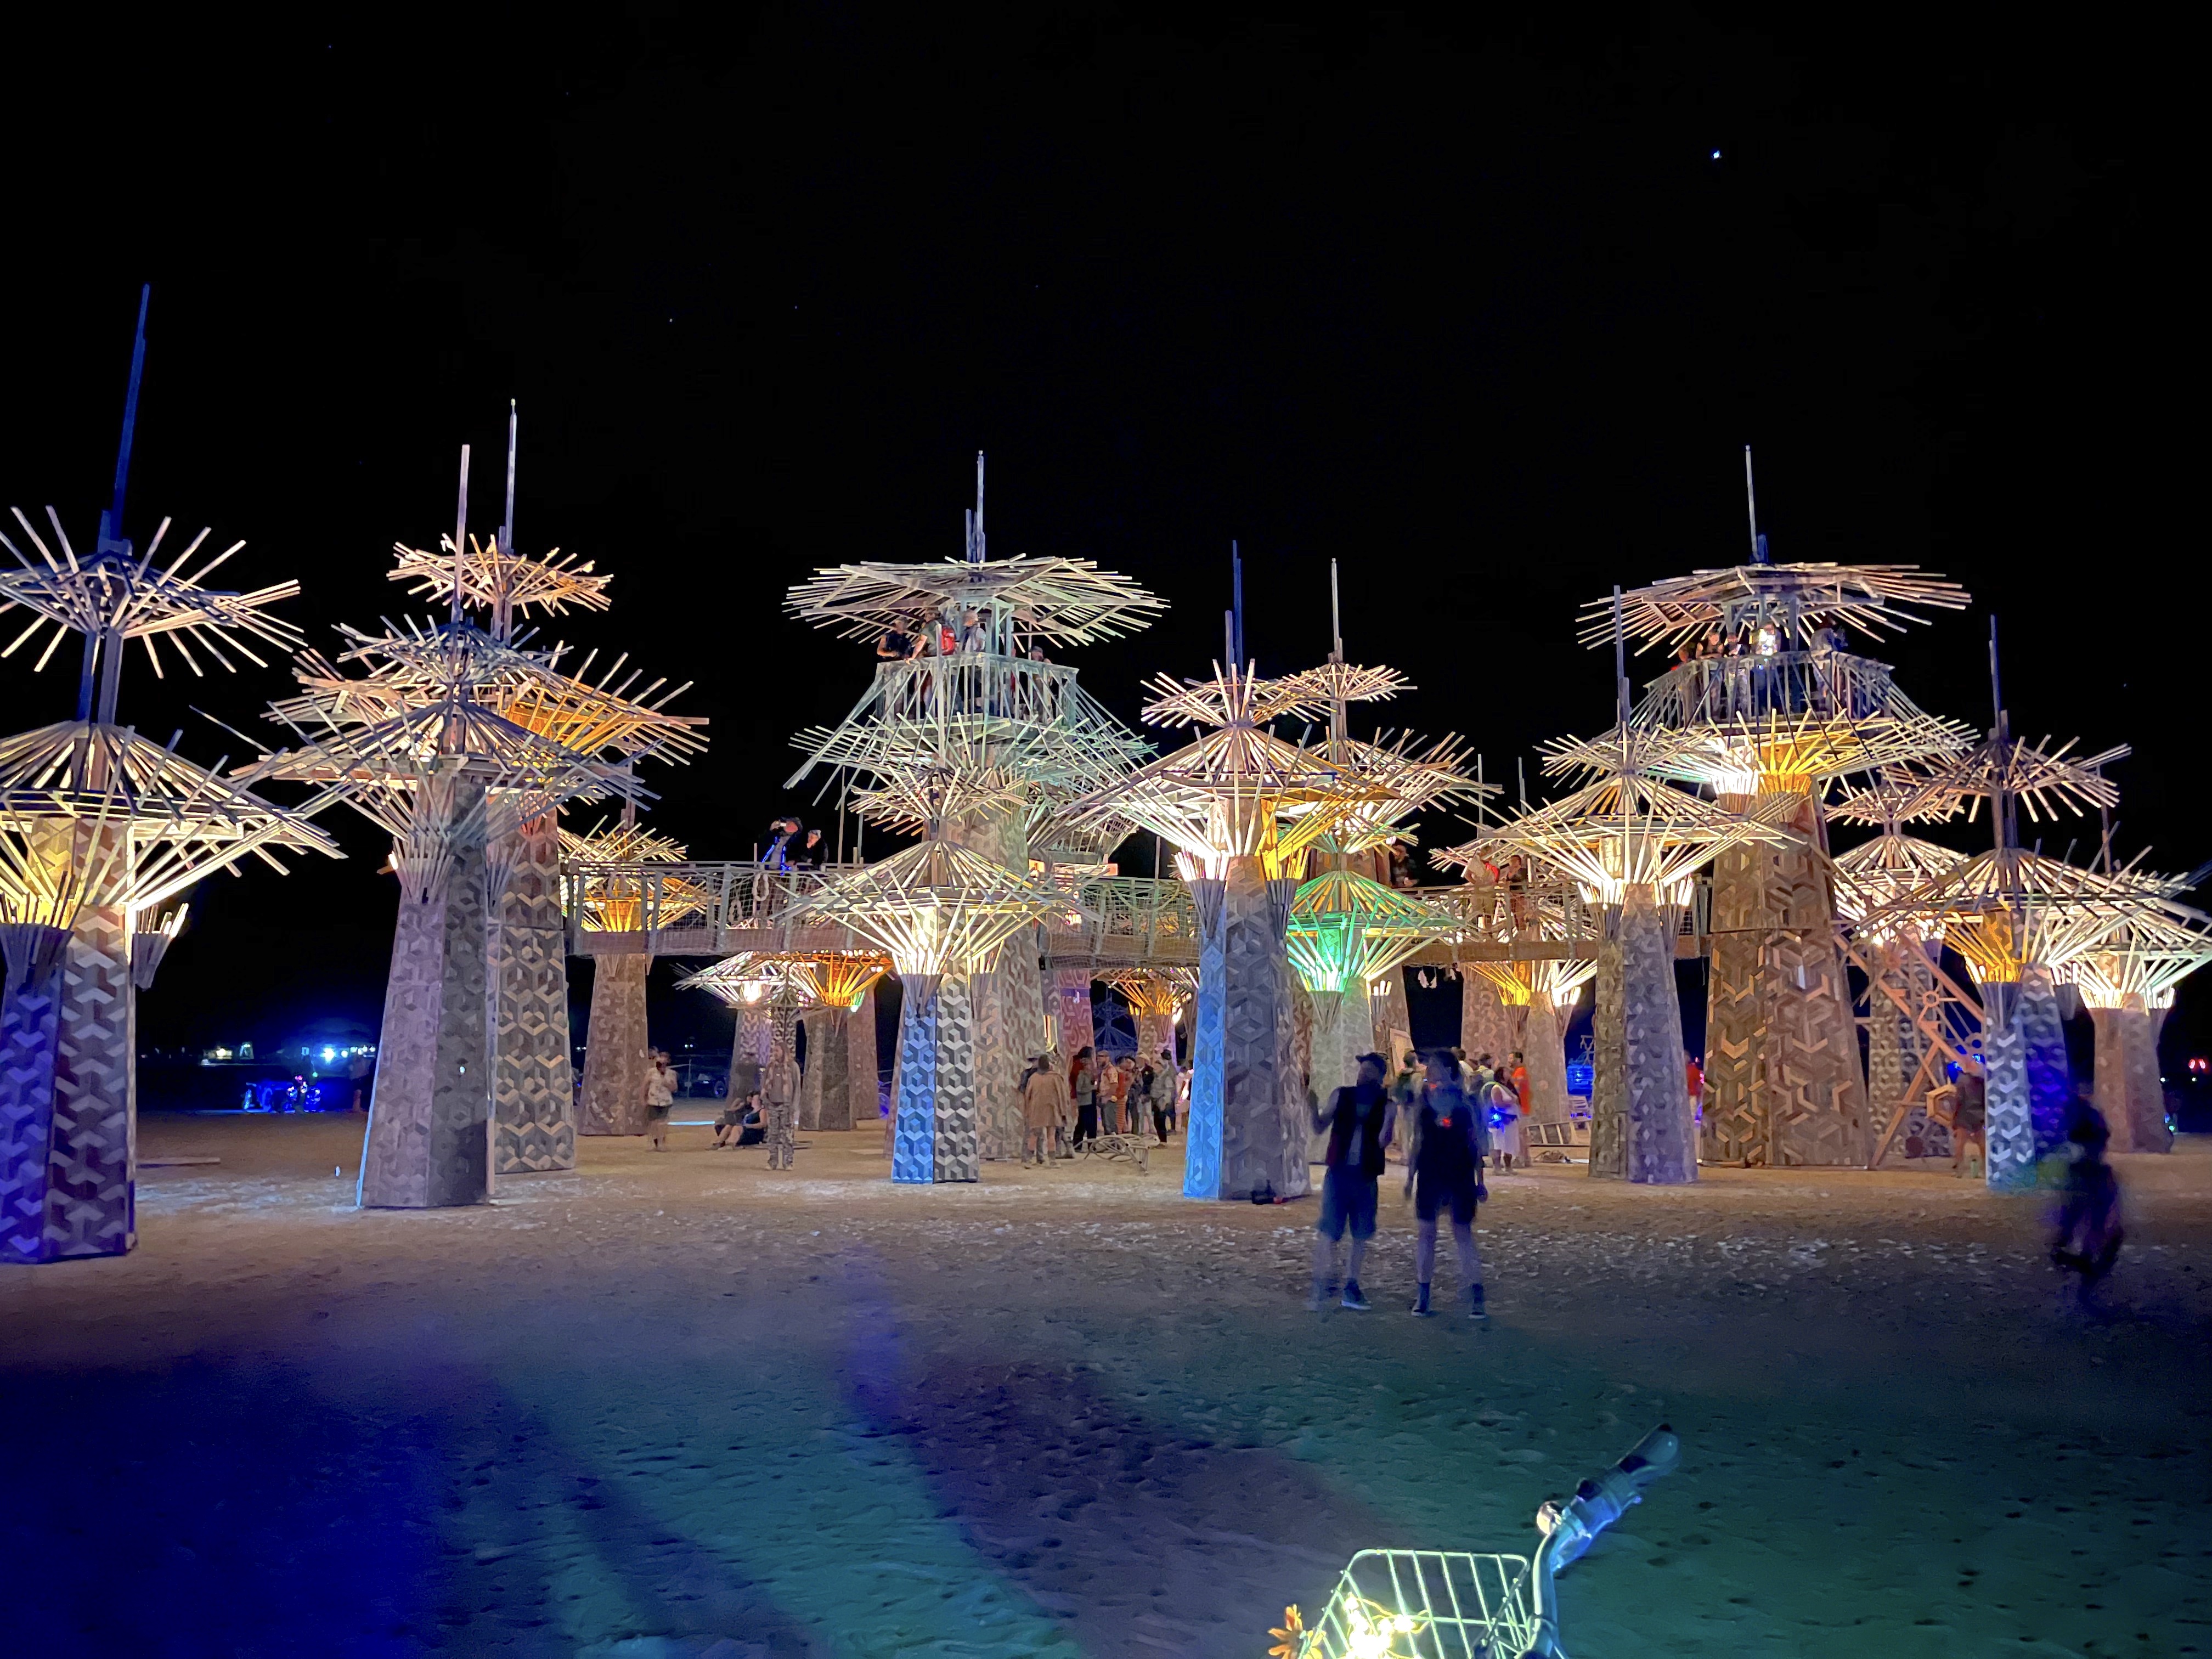 Paradisium by Dave Keane & The Folly Builders @artnet news